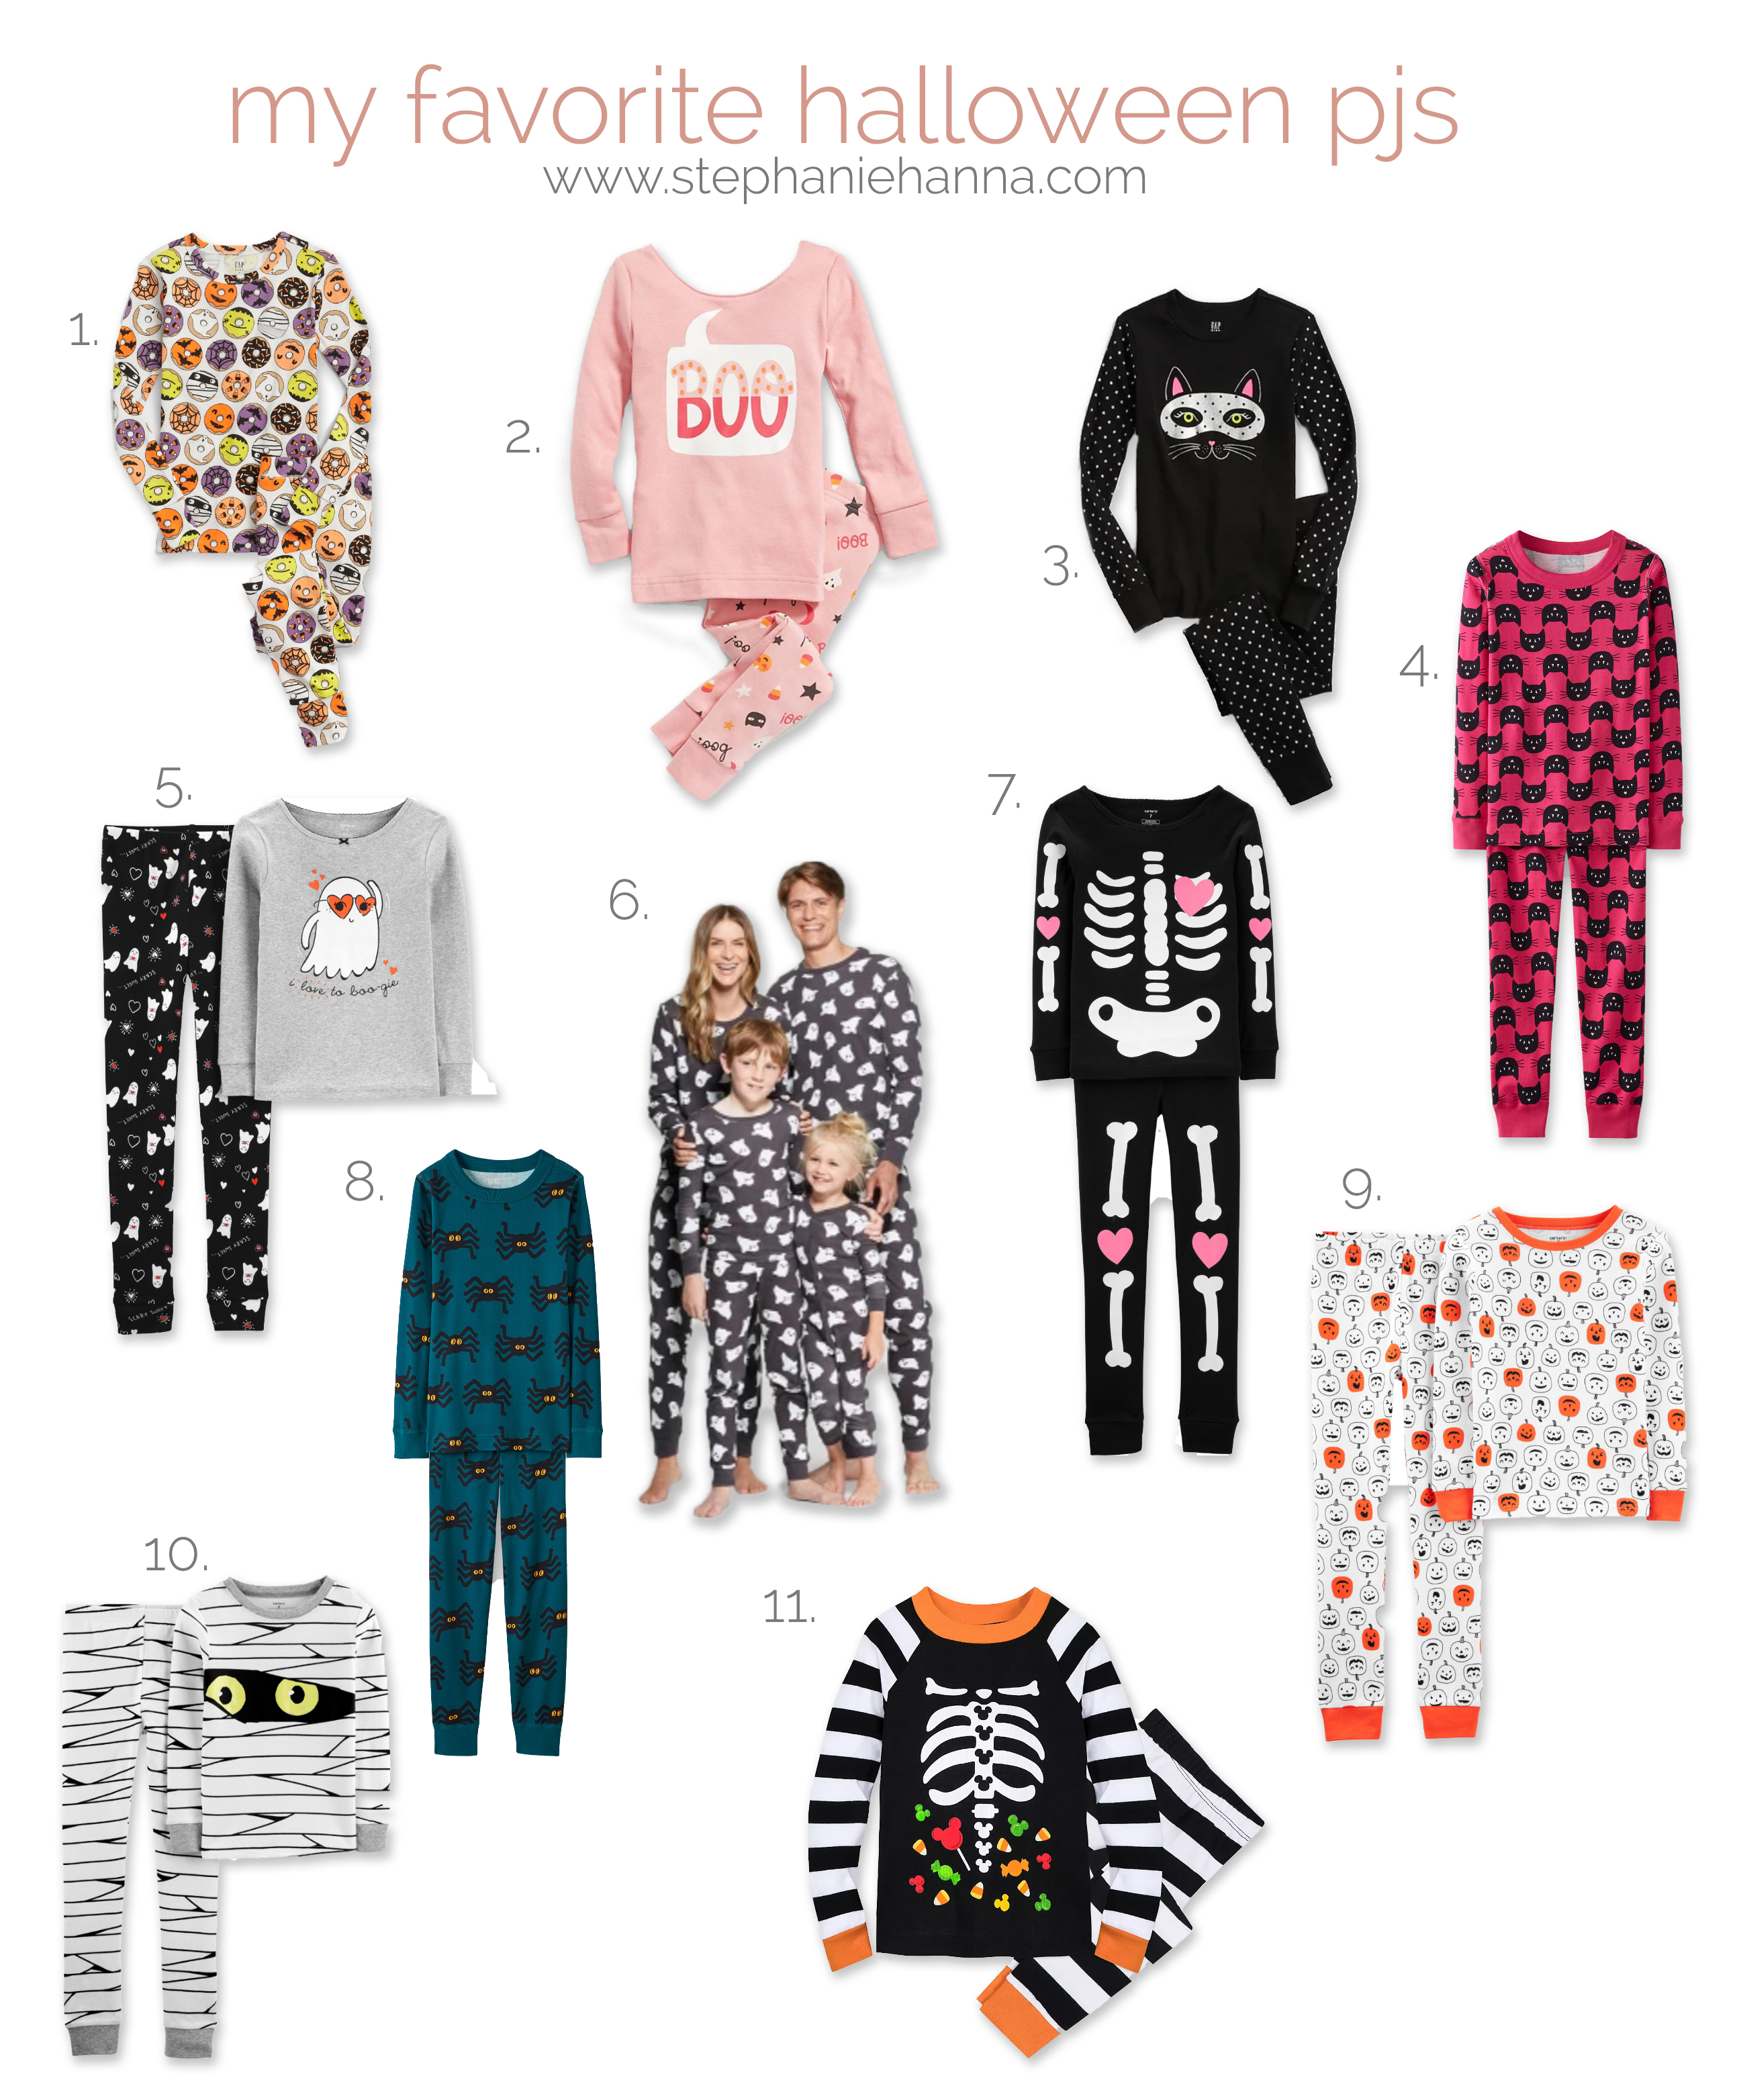 Cozy Halloween Pajamas for kids and the whole family